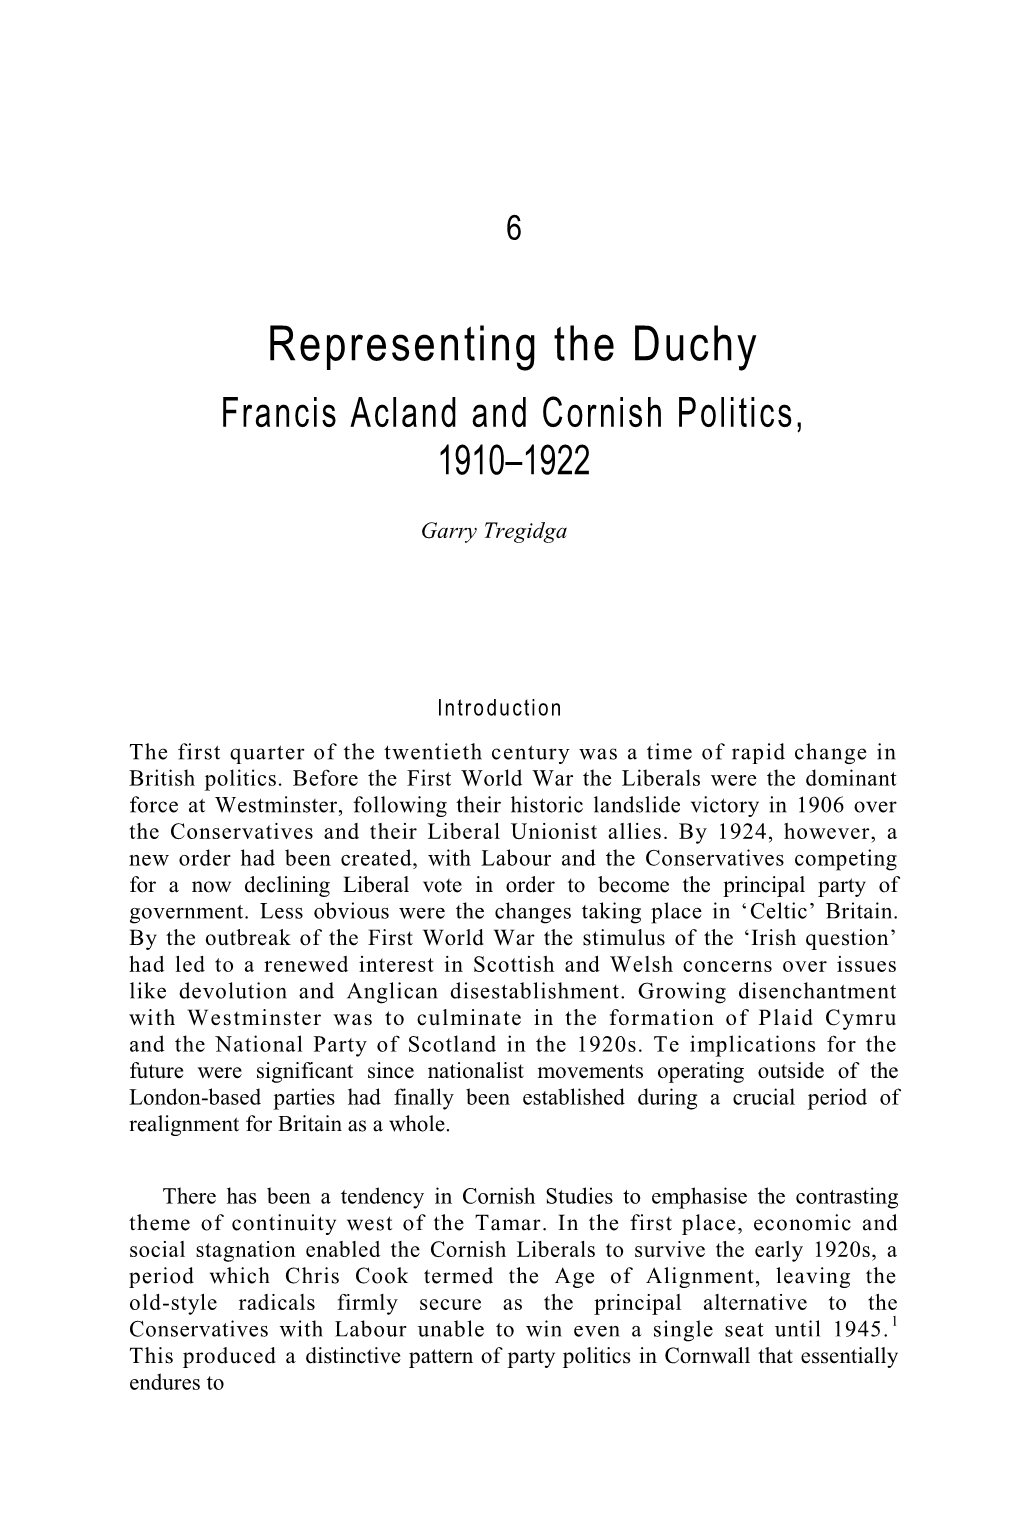 Representing the Duchy Francis Acland and Cornish Politics, 1910–1922